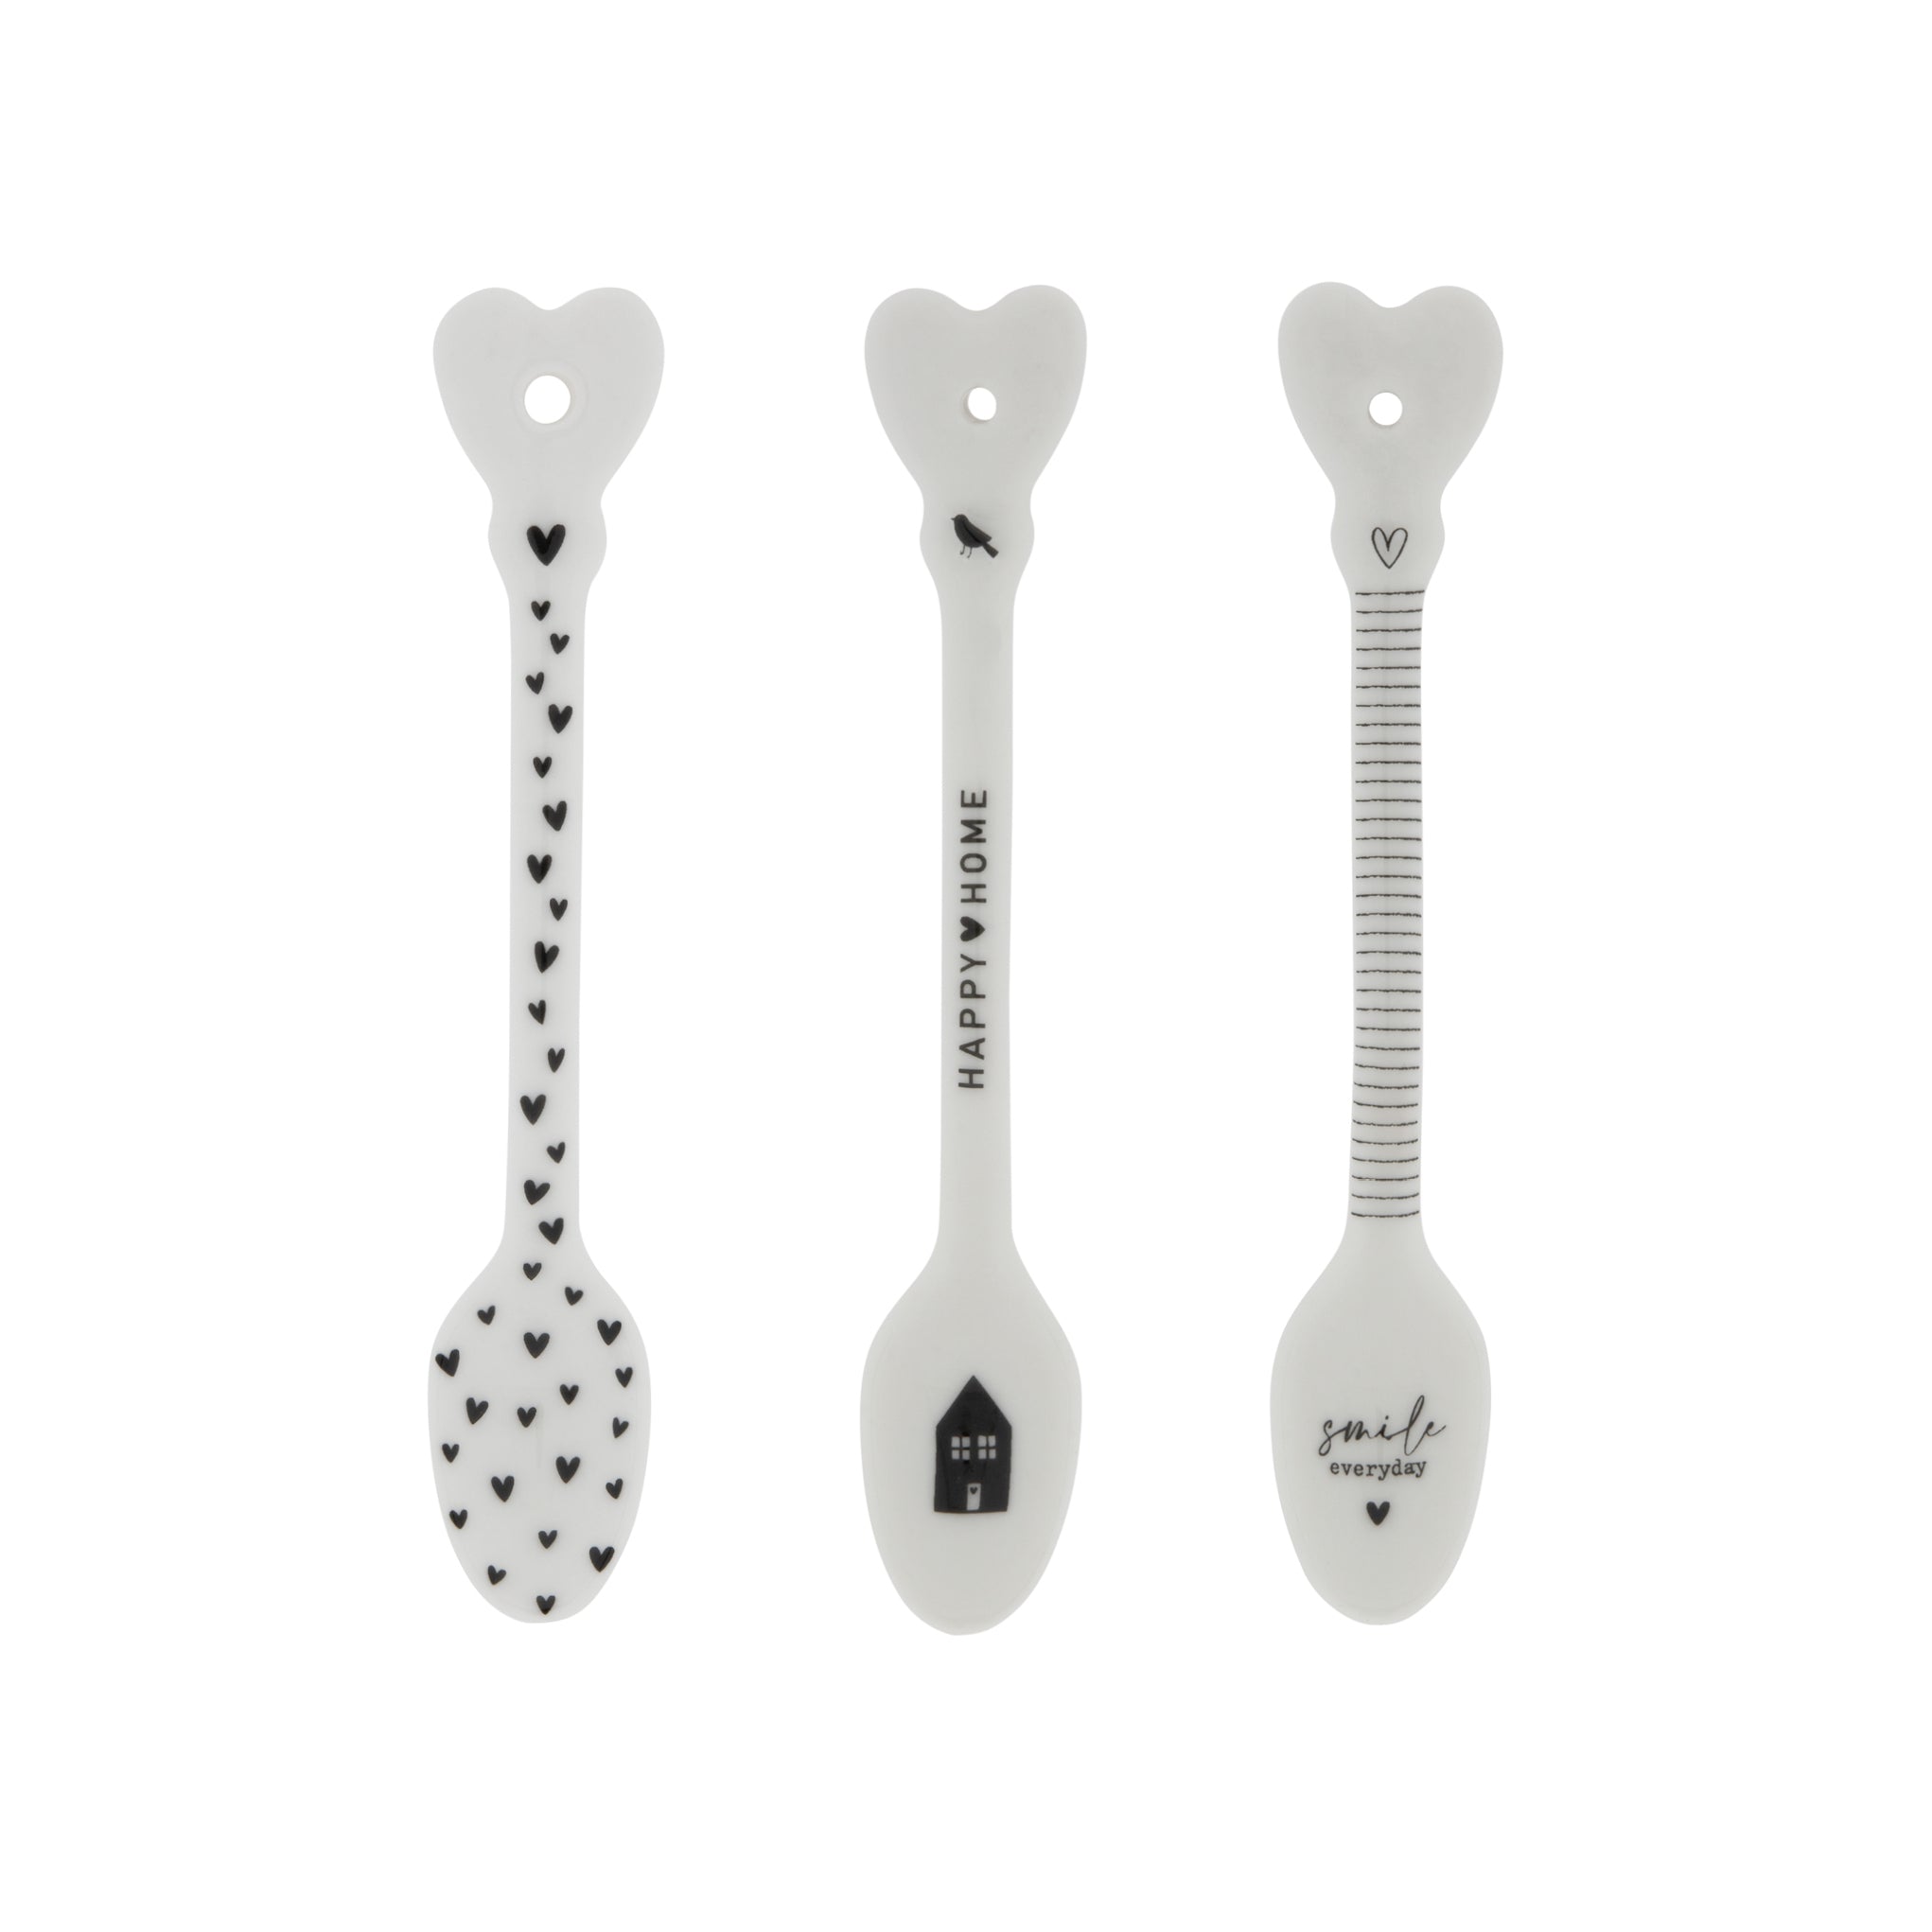 Set of 3 assorted teaspoons, with Happy Home Decorus, hearts and lines